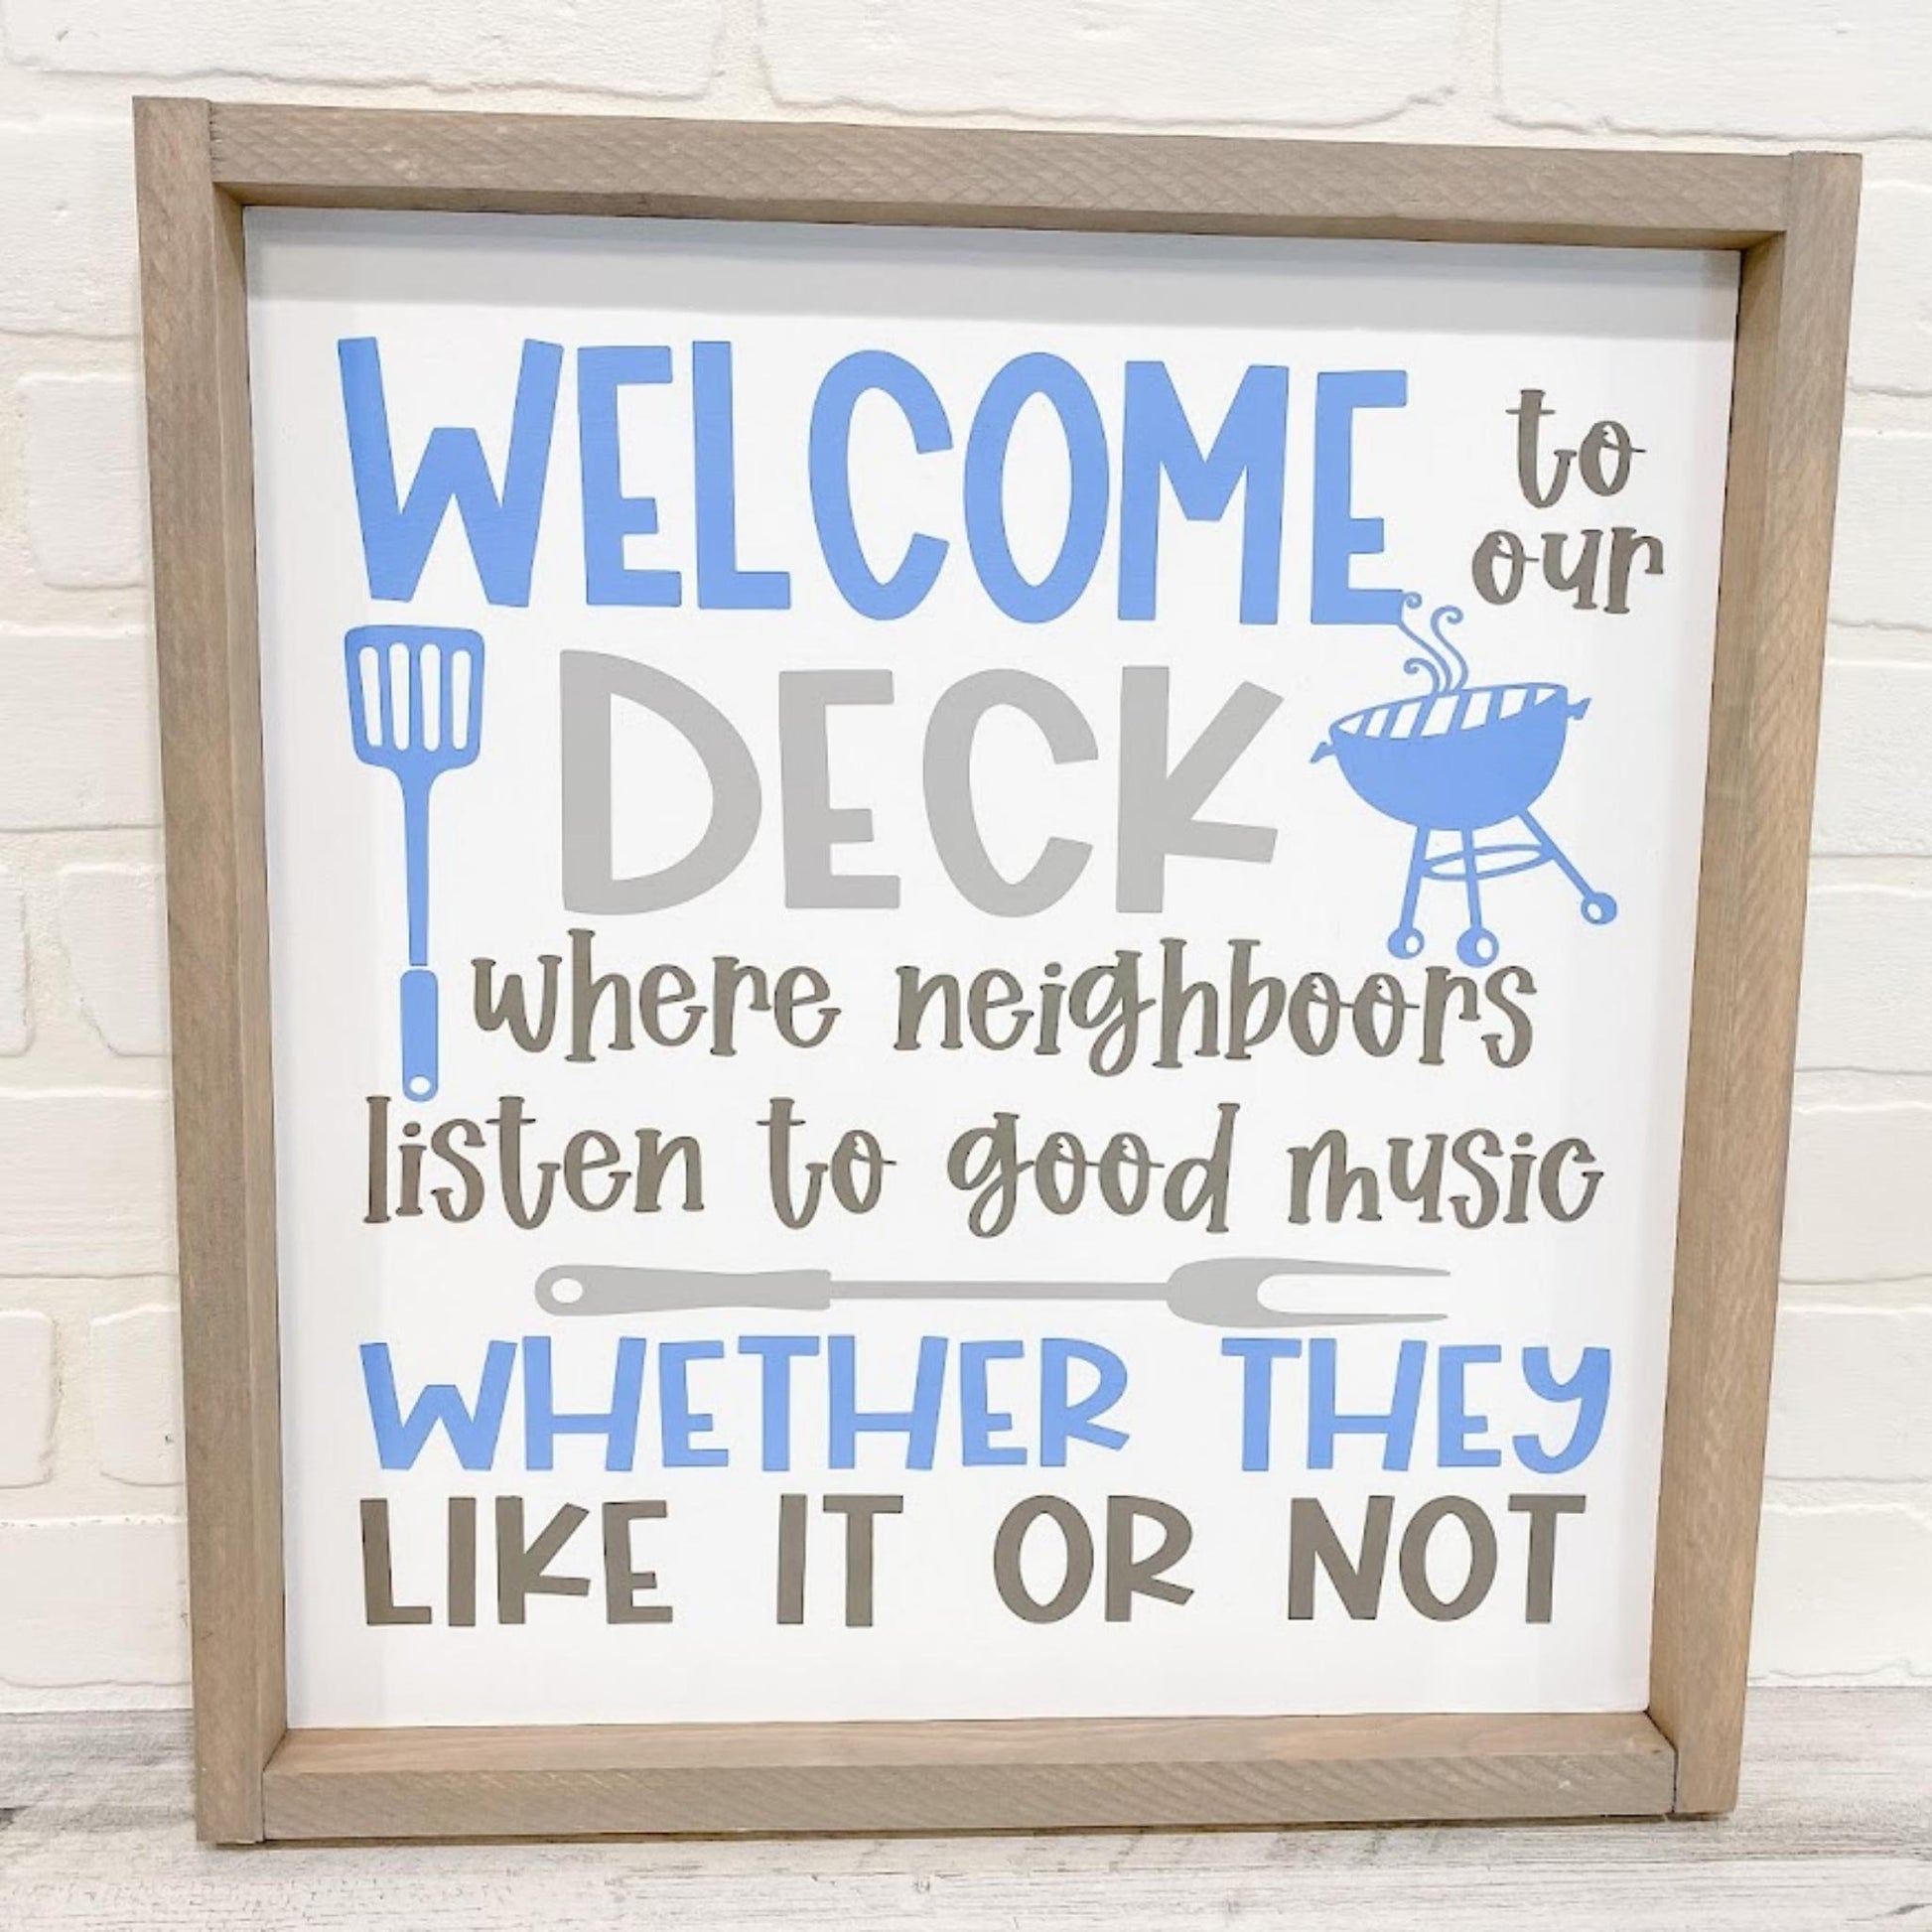 WELCOME TO OUR DECK - B-Cozy Home Decor